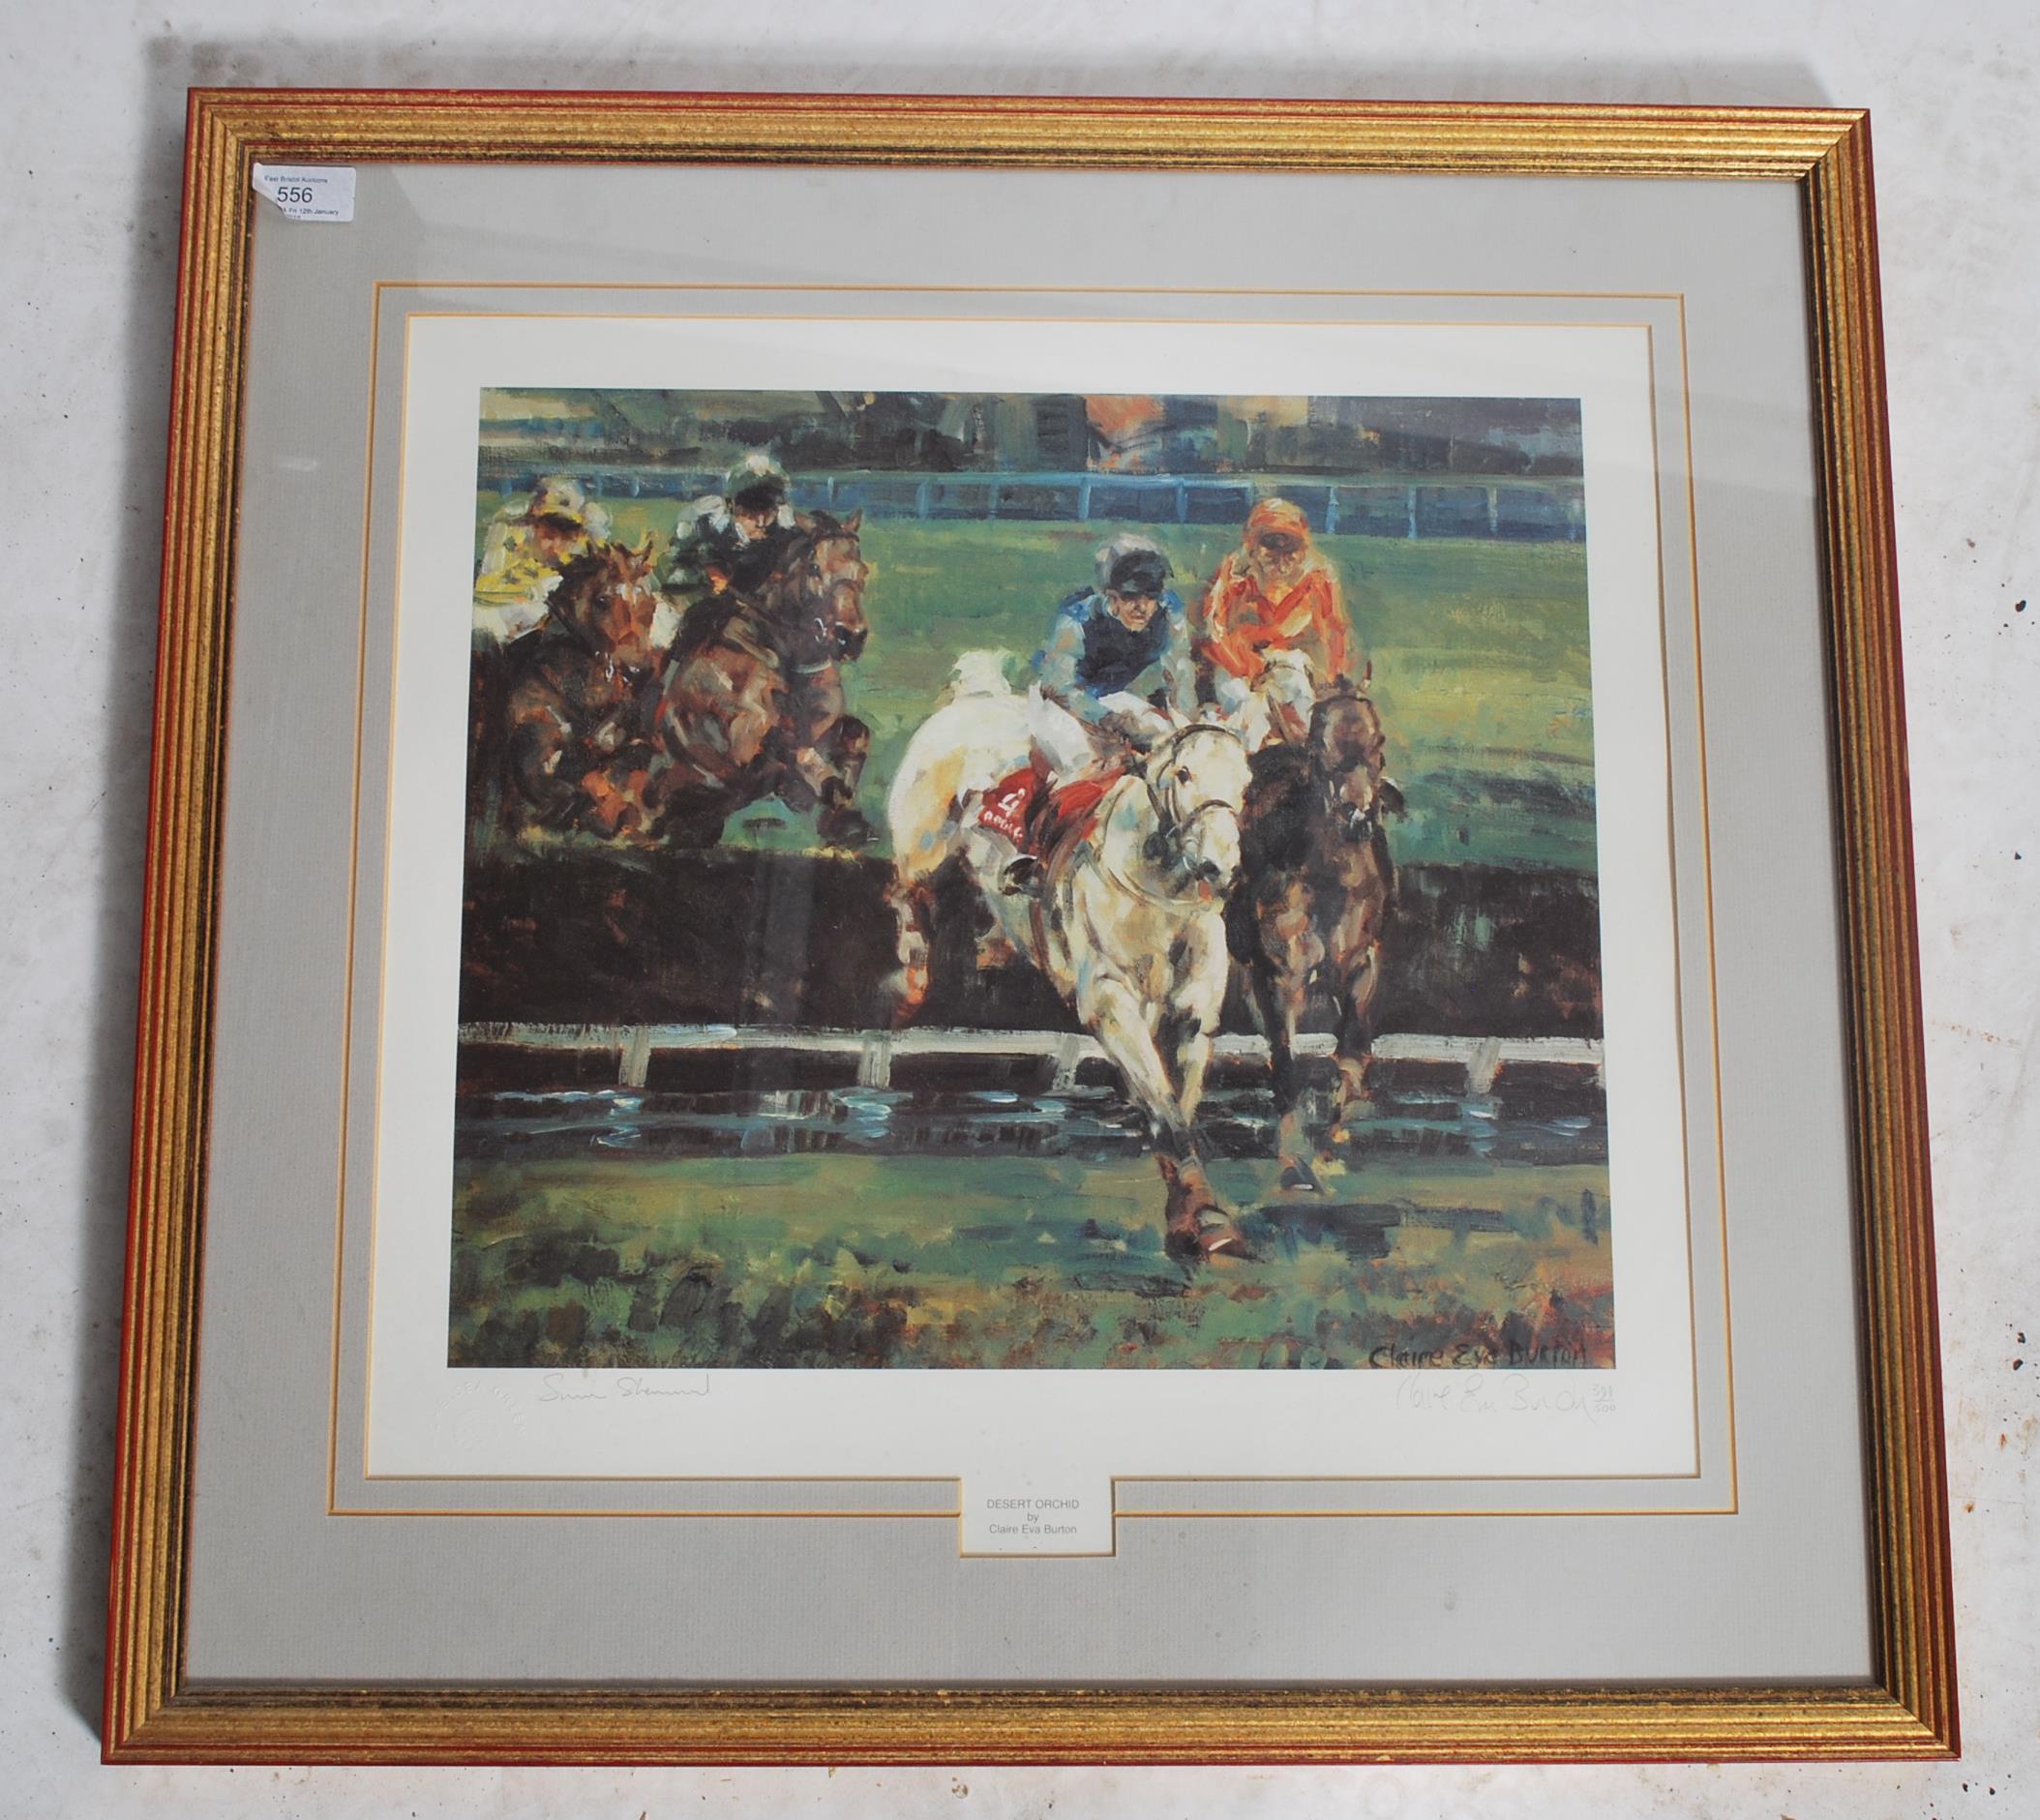 Desert Orchid: An contemporary 20th century print - Image 2 of 3